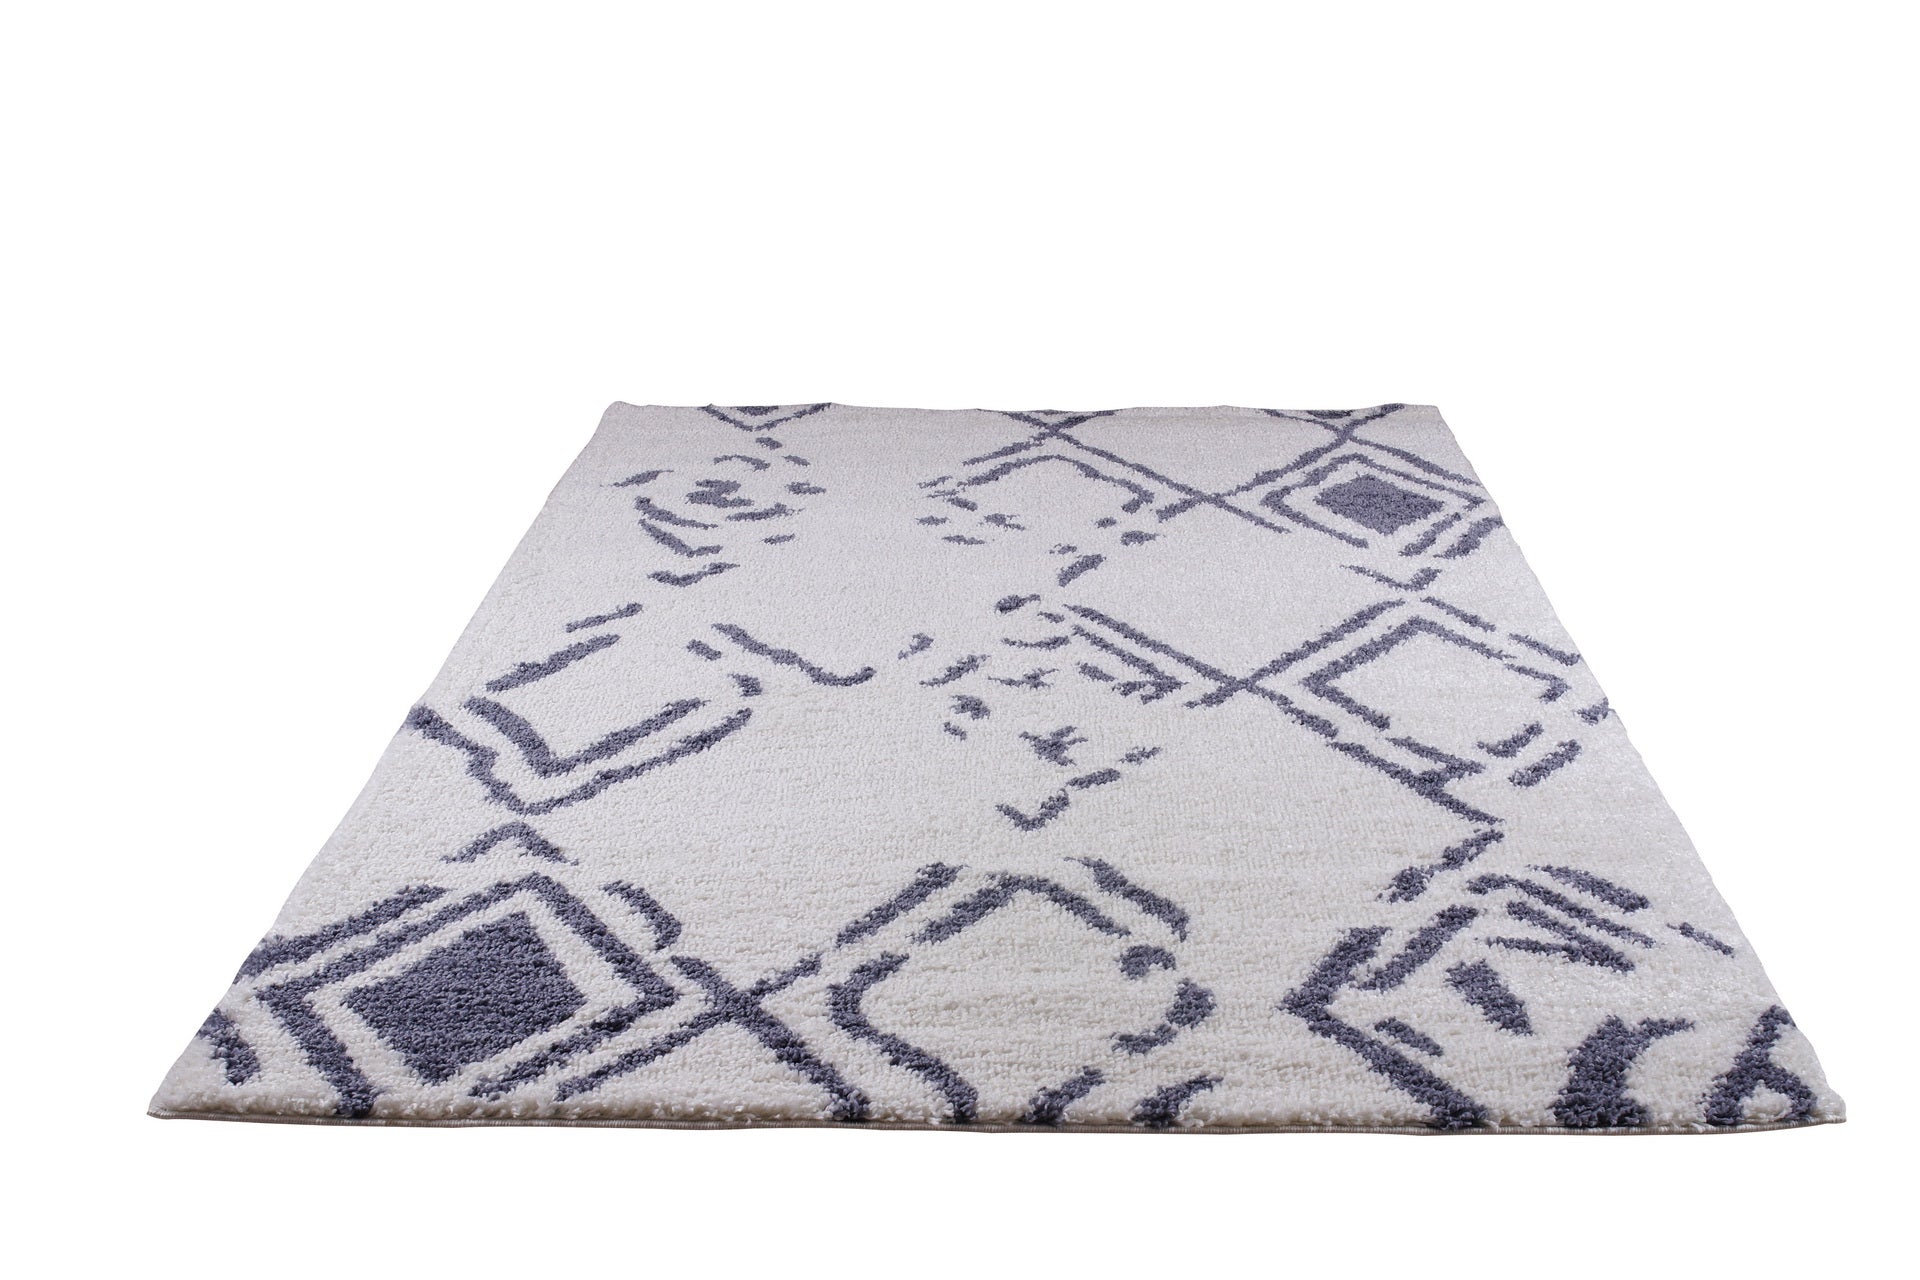 ladole rugs shaggy kenitra european abstract soft polypropylene modern small mat doormat rug in white light gray 110 x 211 57cm x 90cm 2x8, 3x10, 2x10 ft Long Runner Rug, Hallway, Balcony, Entry Way, Kitchen, Stairs